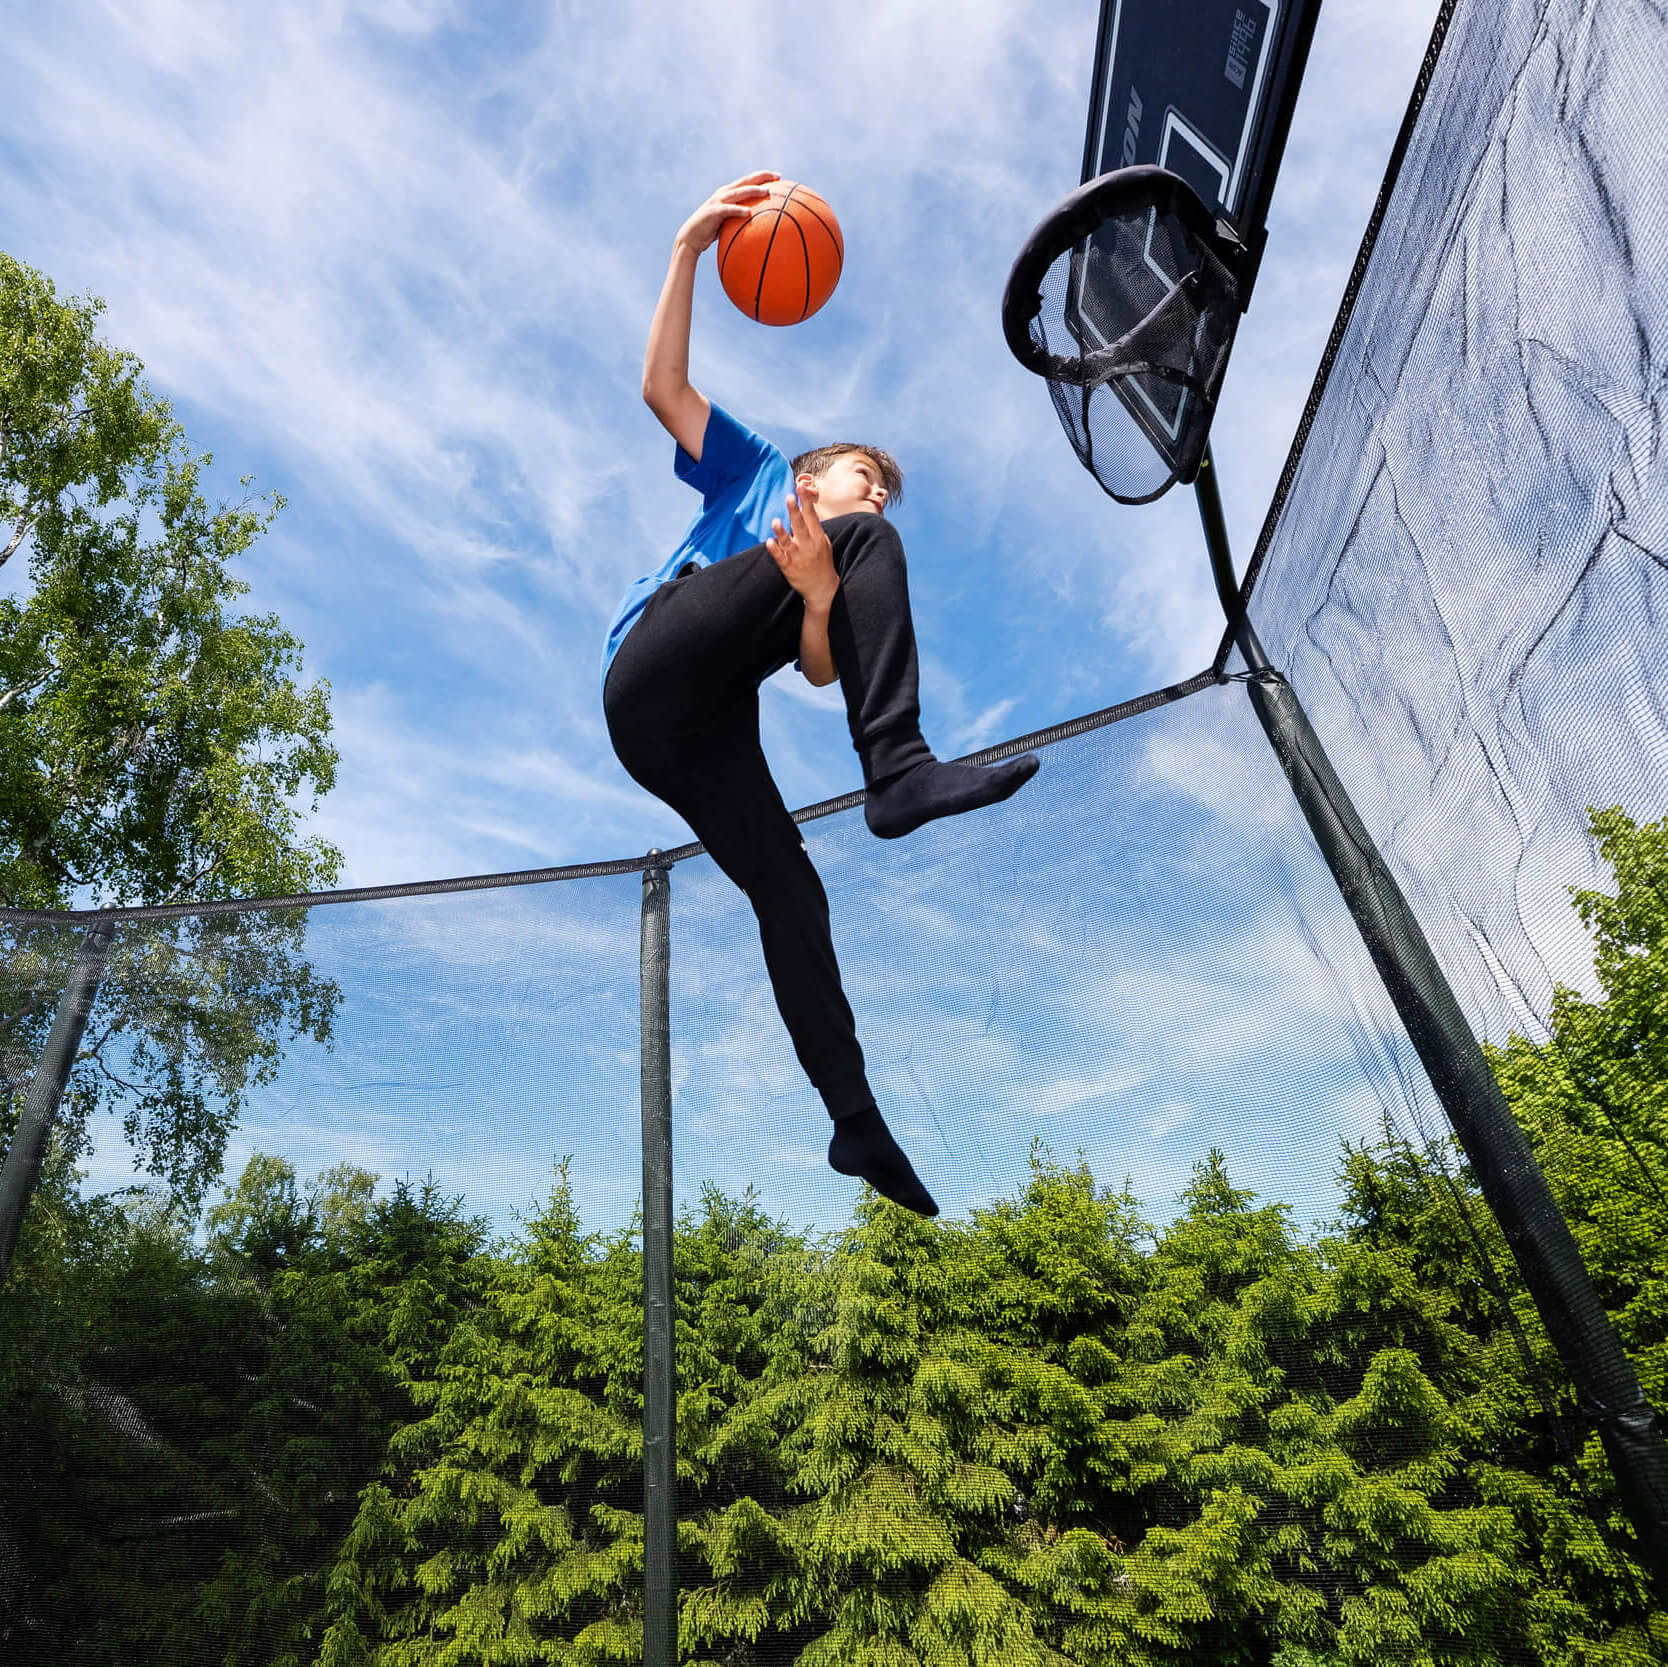 A boy jumps holding his leg and throws a basketball into the trampoline basketball hoop.